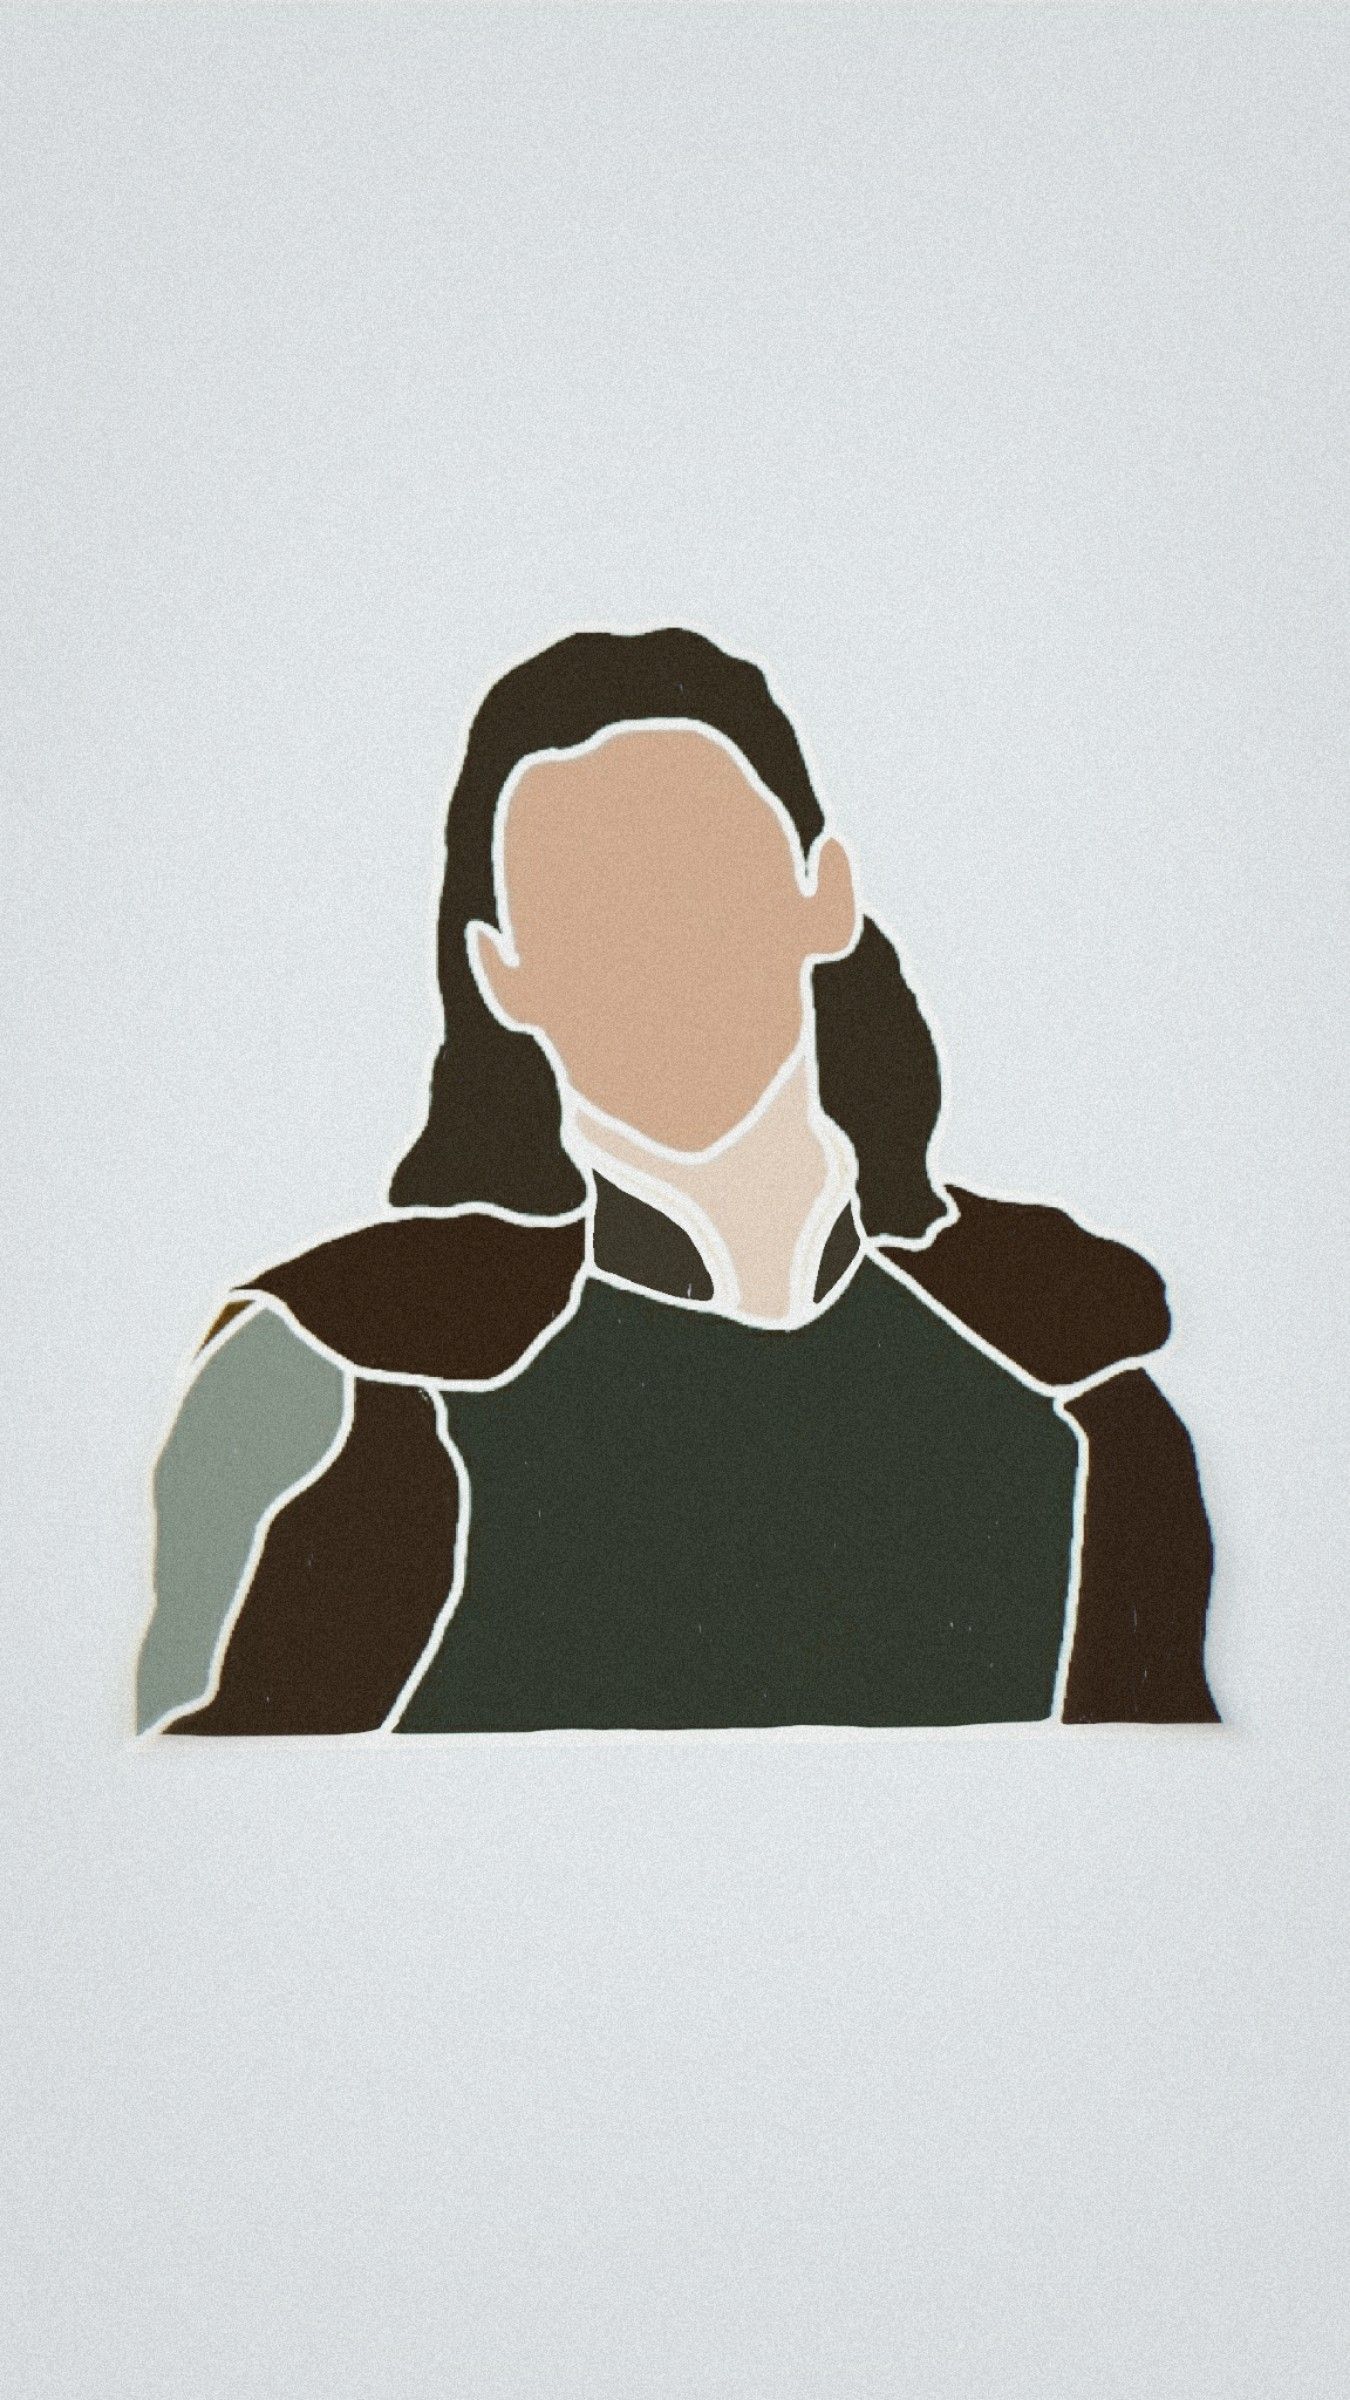 A digital drawing of a person with long hair and a green top. - Loki